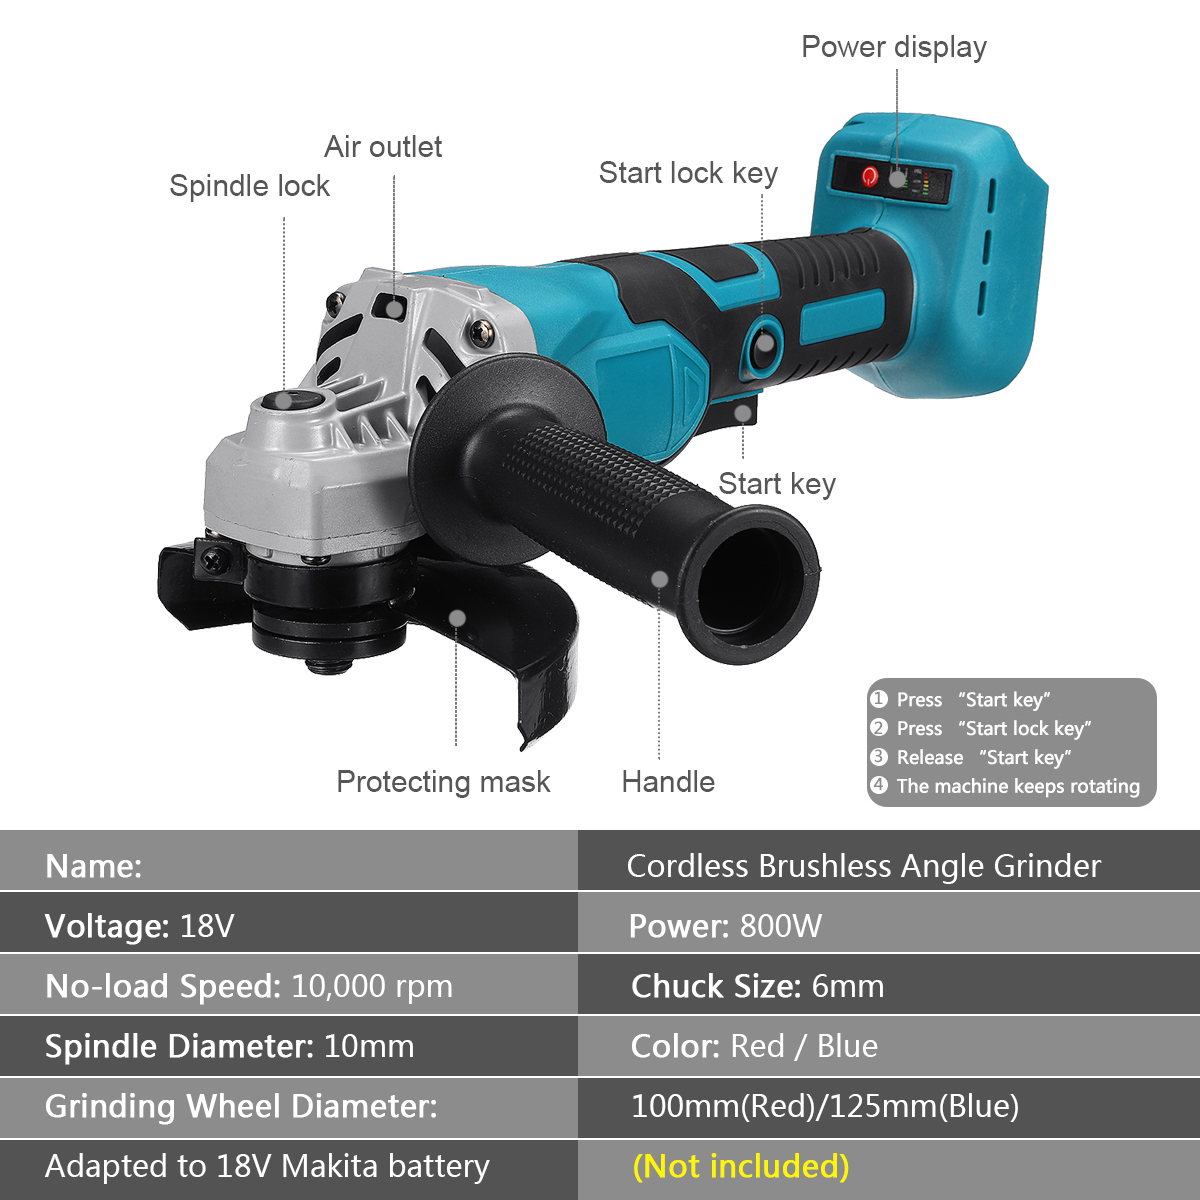 800W-100mm125mm-Brushless-Cordless-Angle-Grinder-For-Makita-18V-Battery-Metal-Cutting-Grinding-Polis-1868076-13